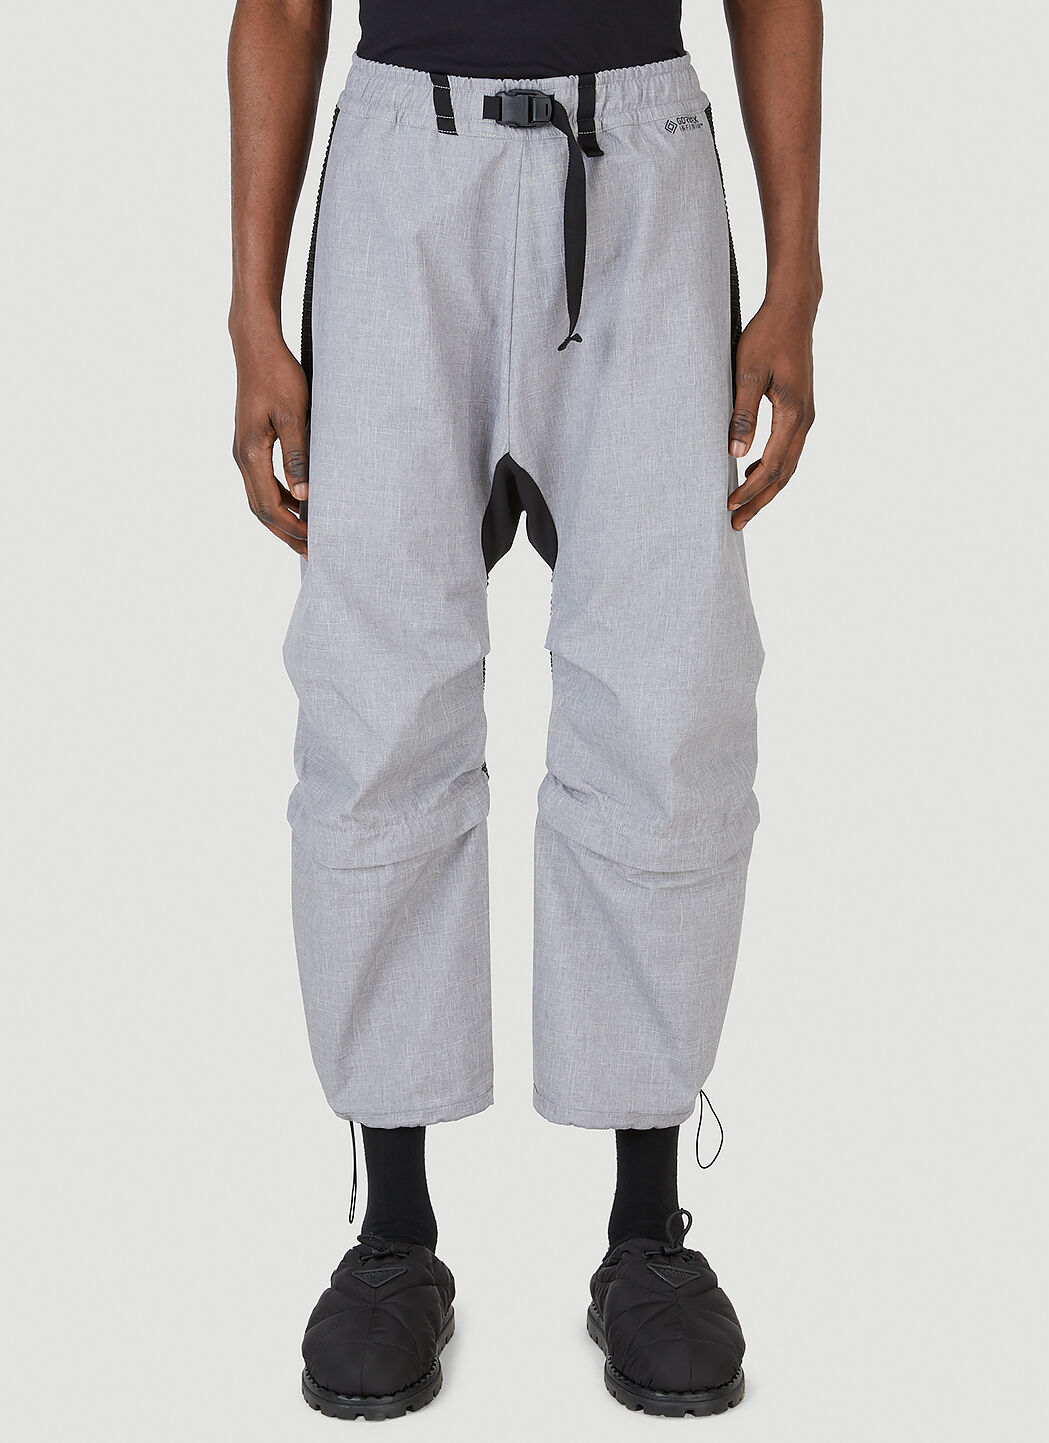 Byborre Weightmap Field Cropped Track Pants in Grey | LN-CC®